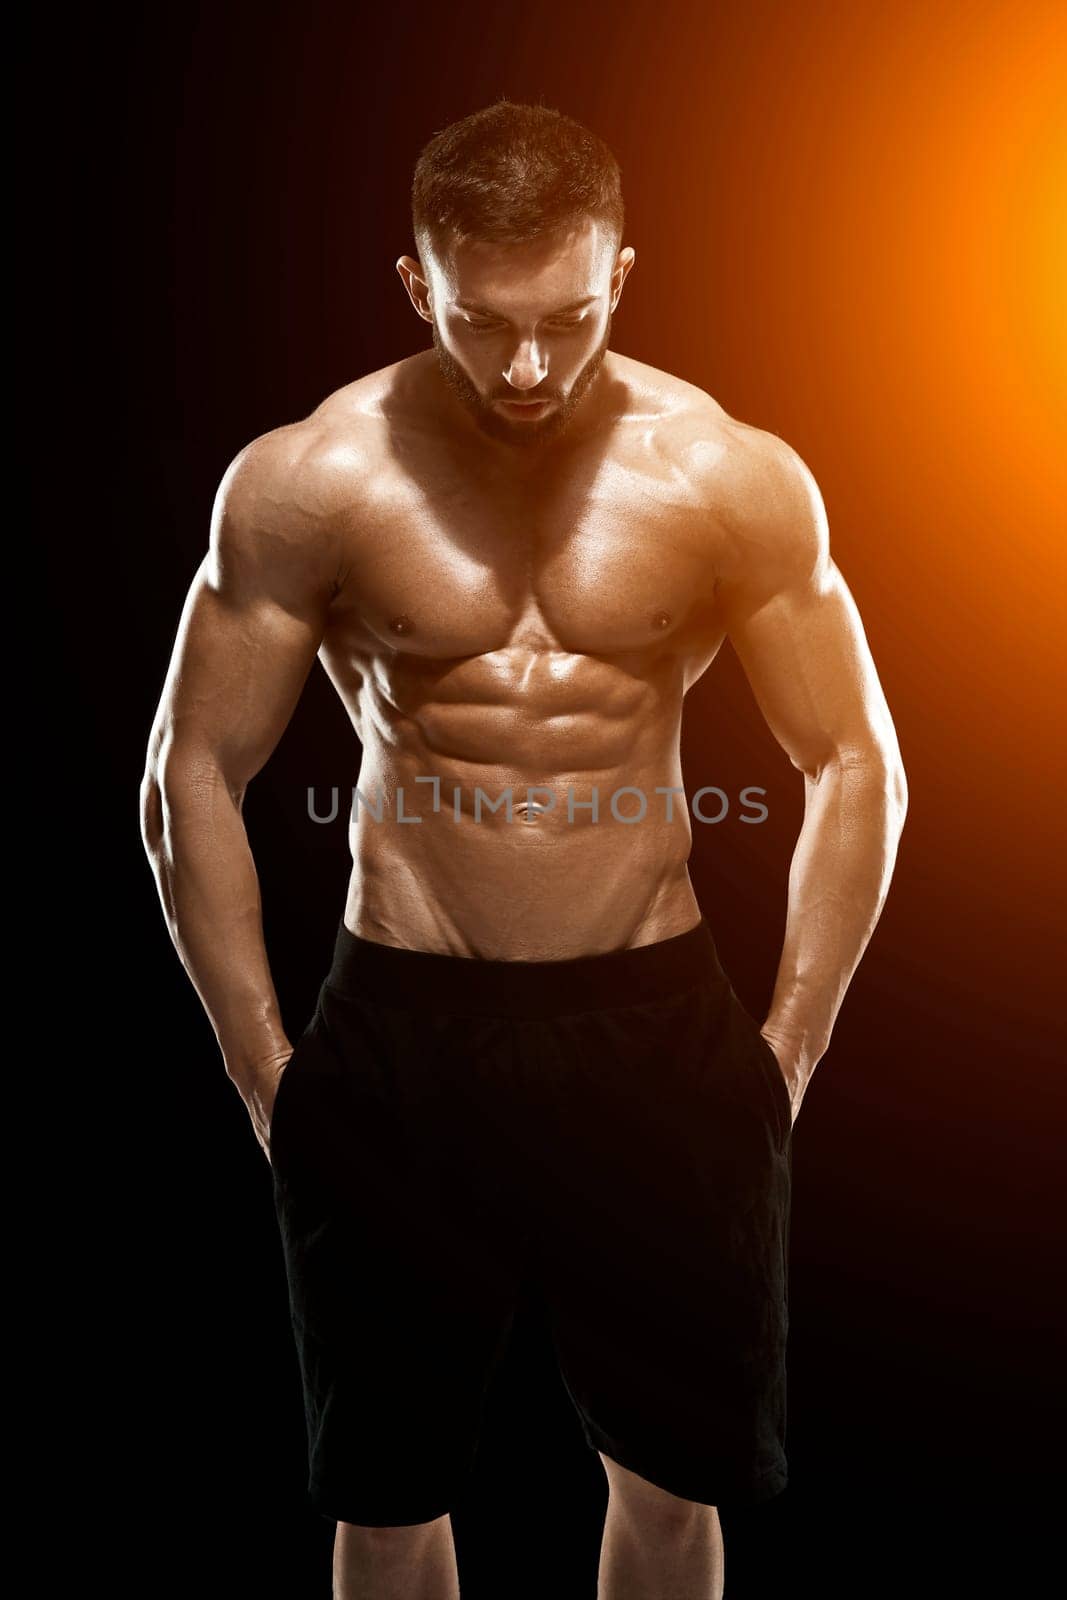 Muscular bodybuilder guy doing posing over black background.. with sun flare